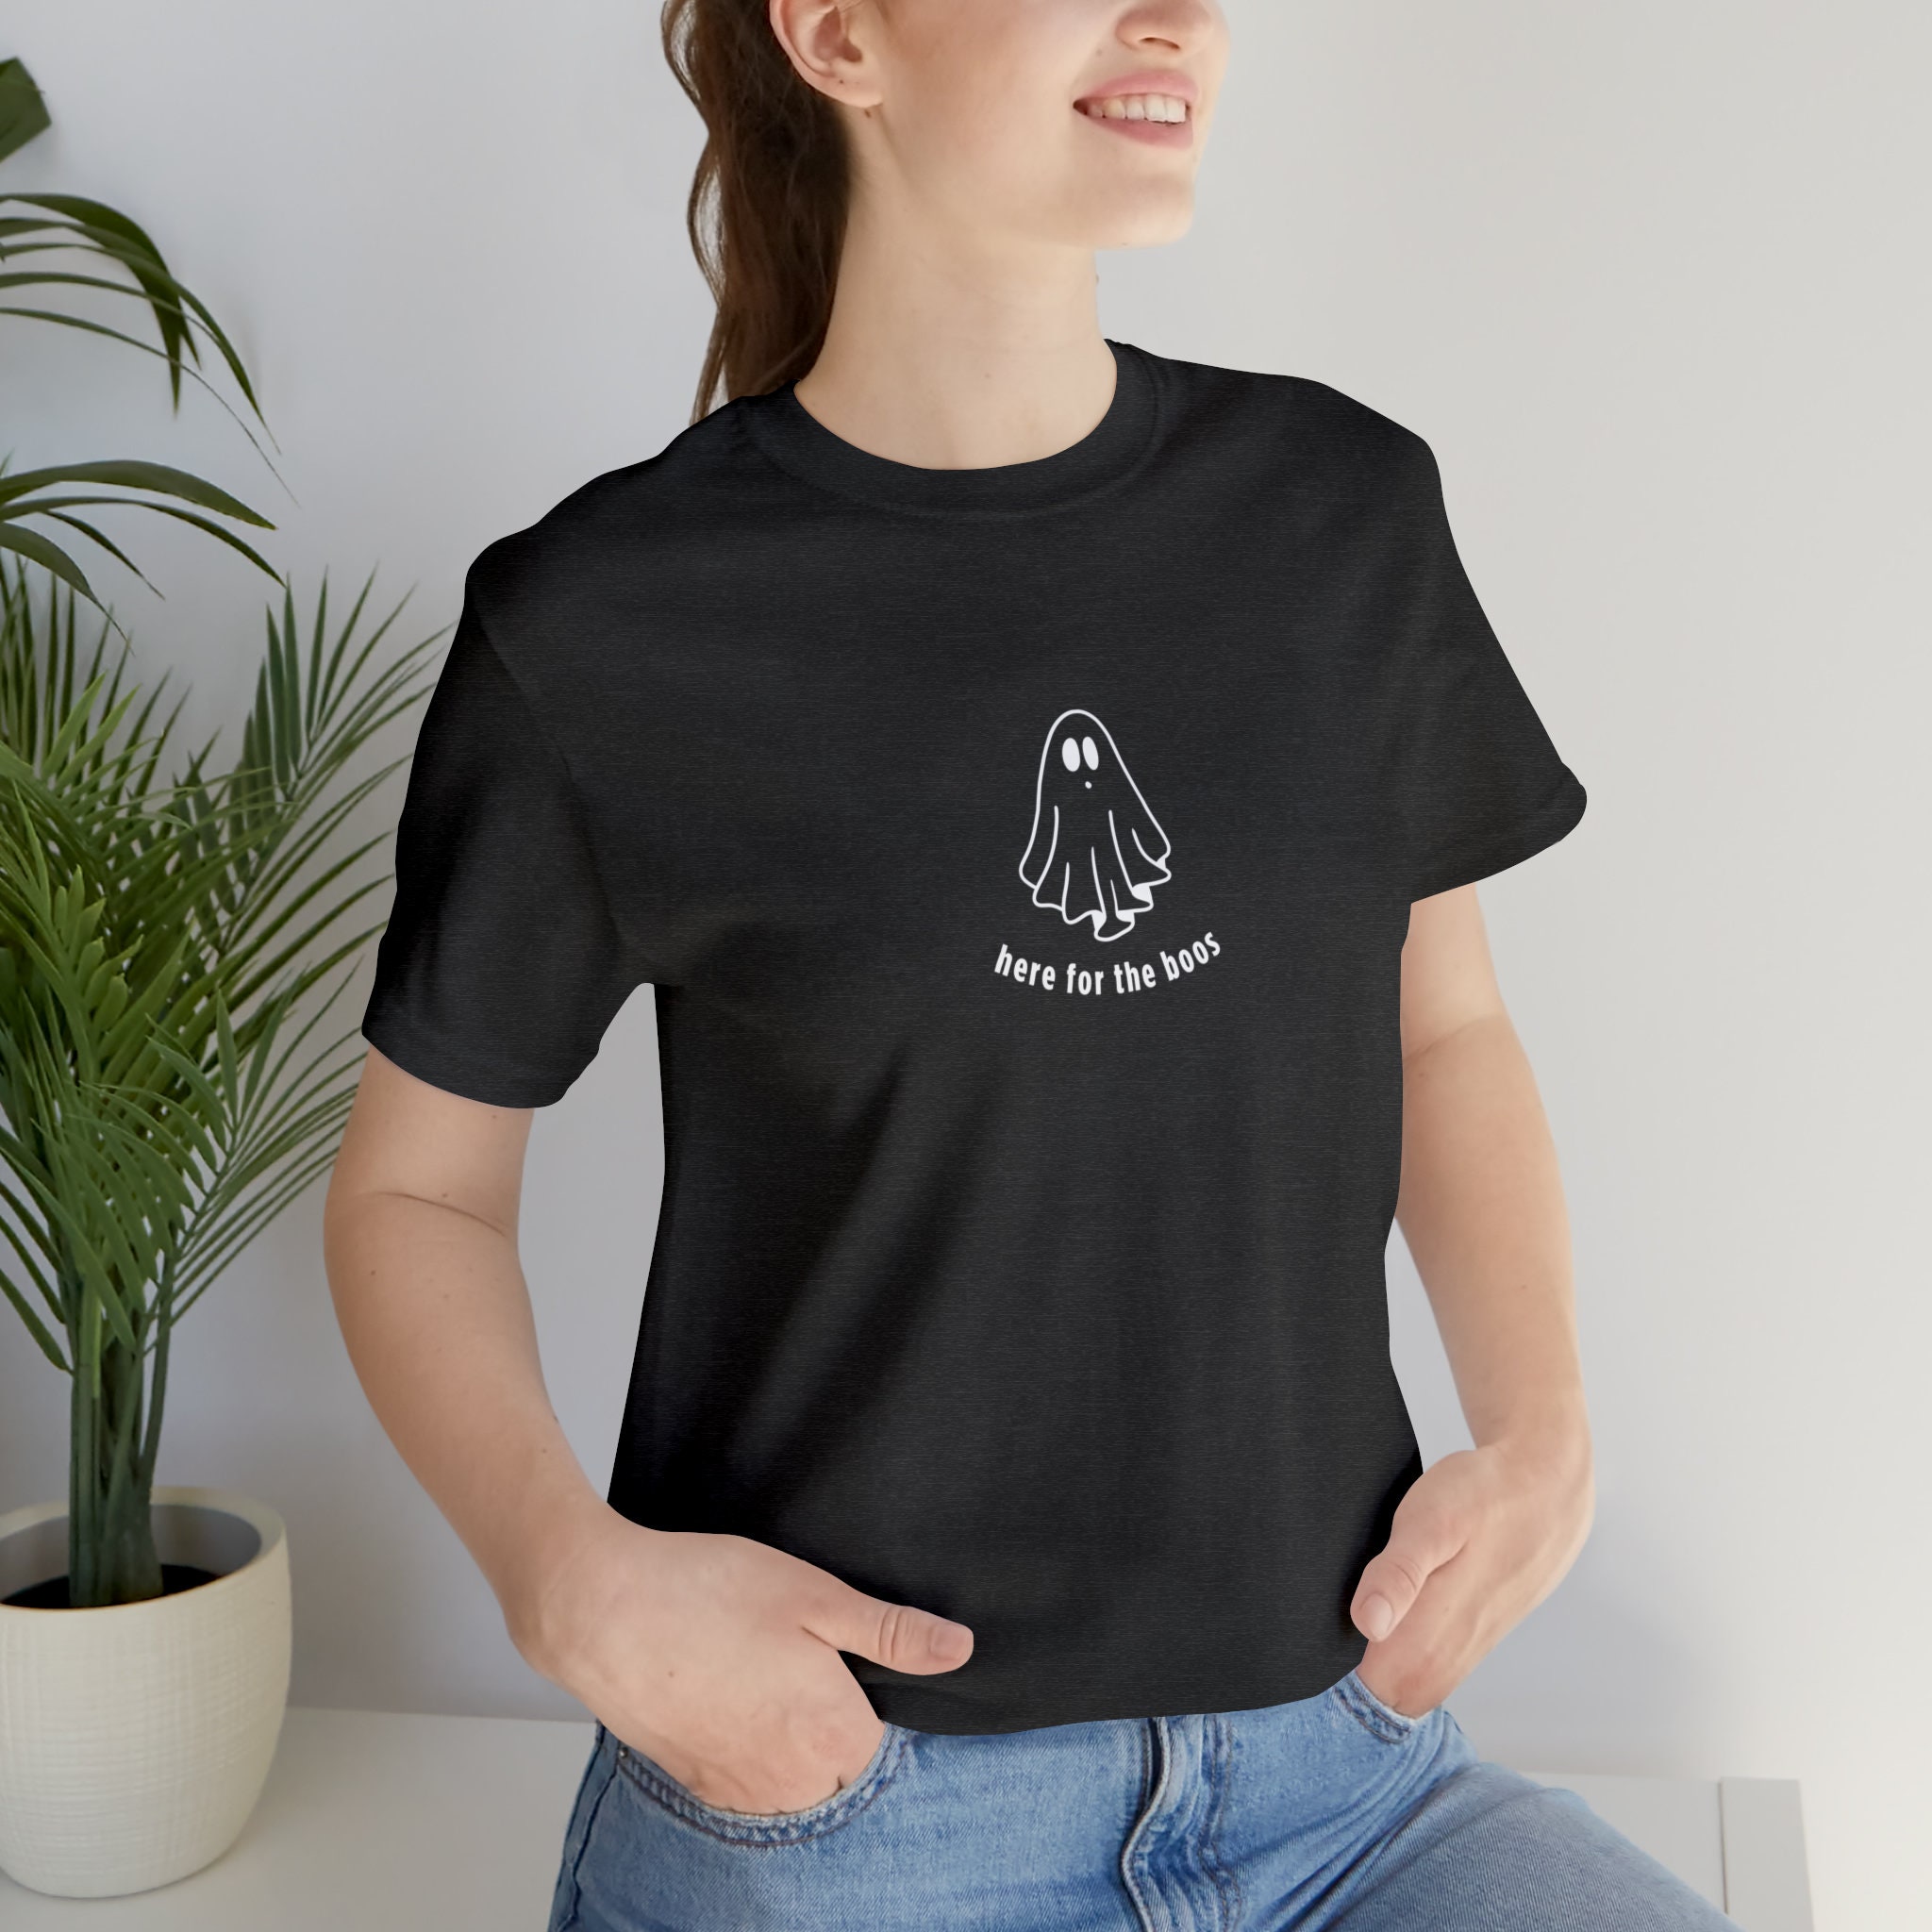 Discover Here for the Boos Shirt, Spooky Vibes Shirt, Retro Ghost Shirt, Spooky Babe Shirt, Spooky Season Shirt, Hey Boo Shirt, Halloween Shirt